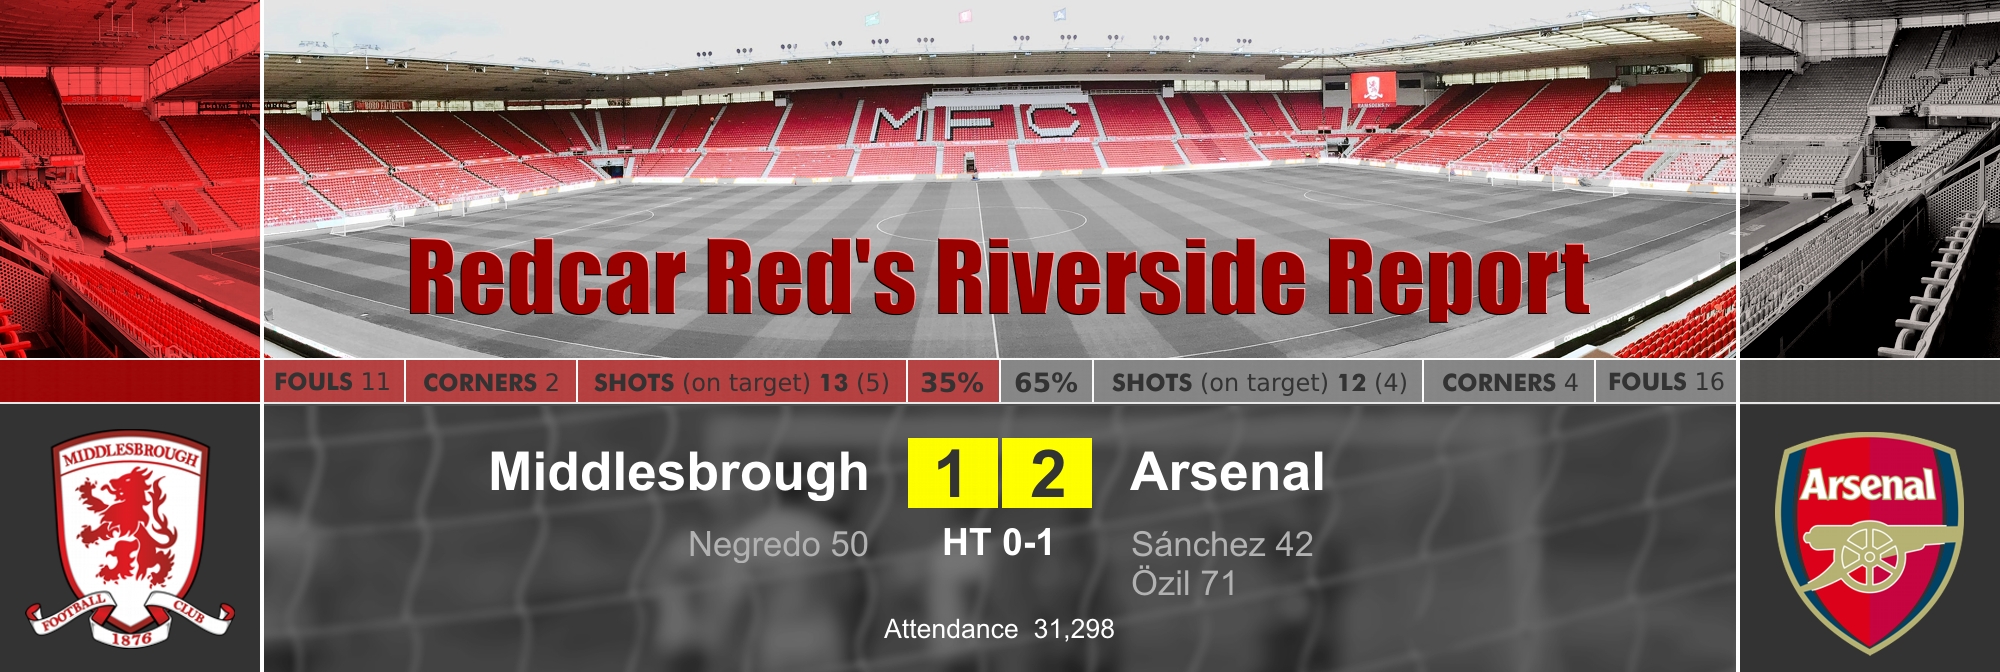 Redcar Red Report - Arsenal 2